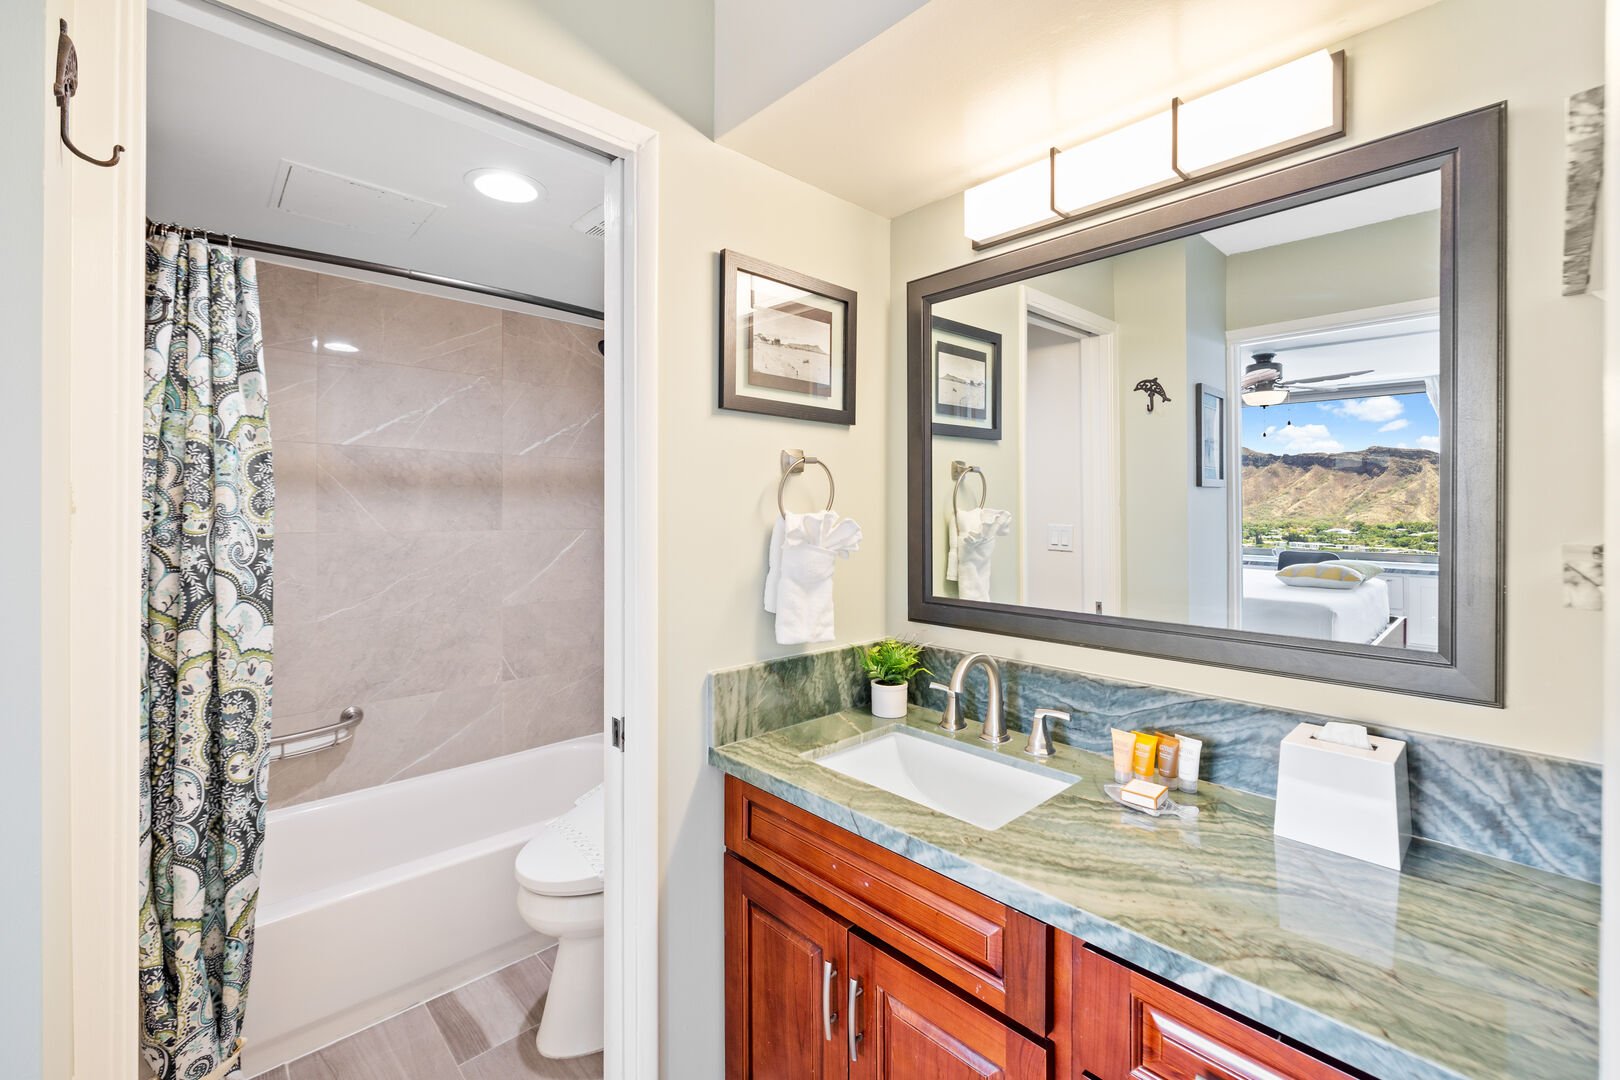 Refresh yourself in this full bathroom with a tub/shower combination and a Toto bidet toilet seat!